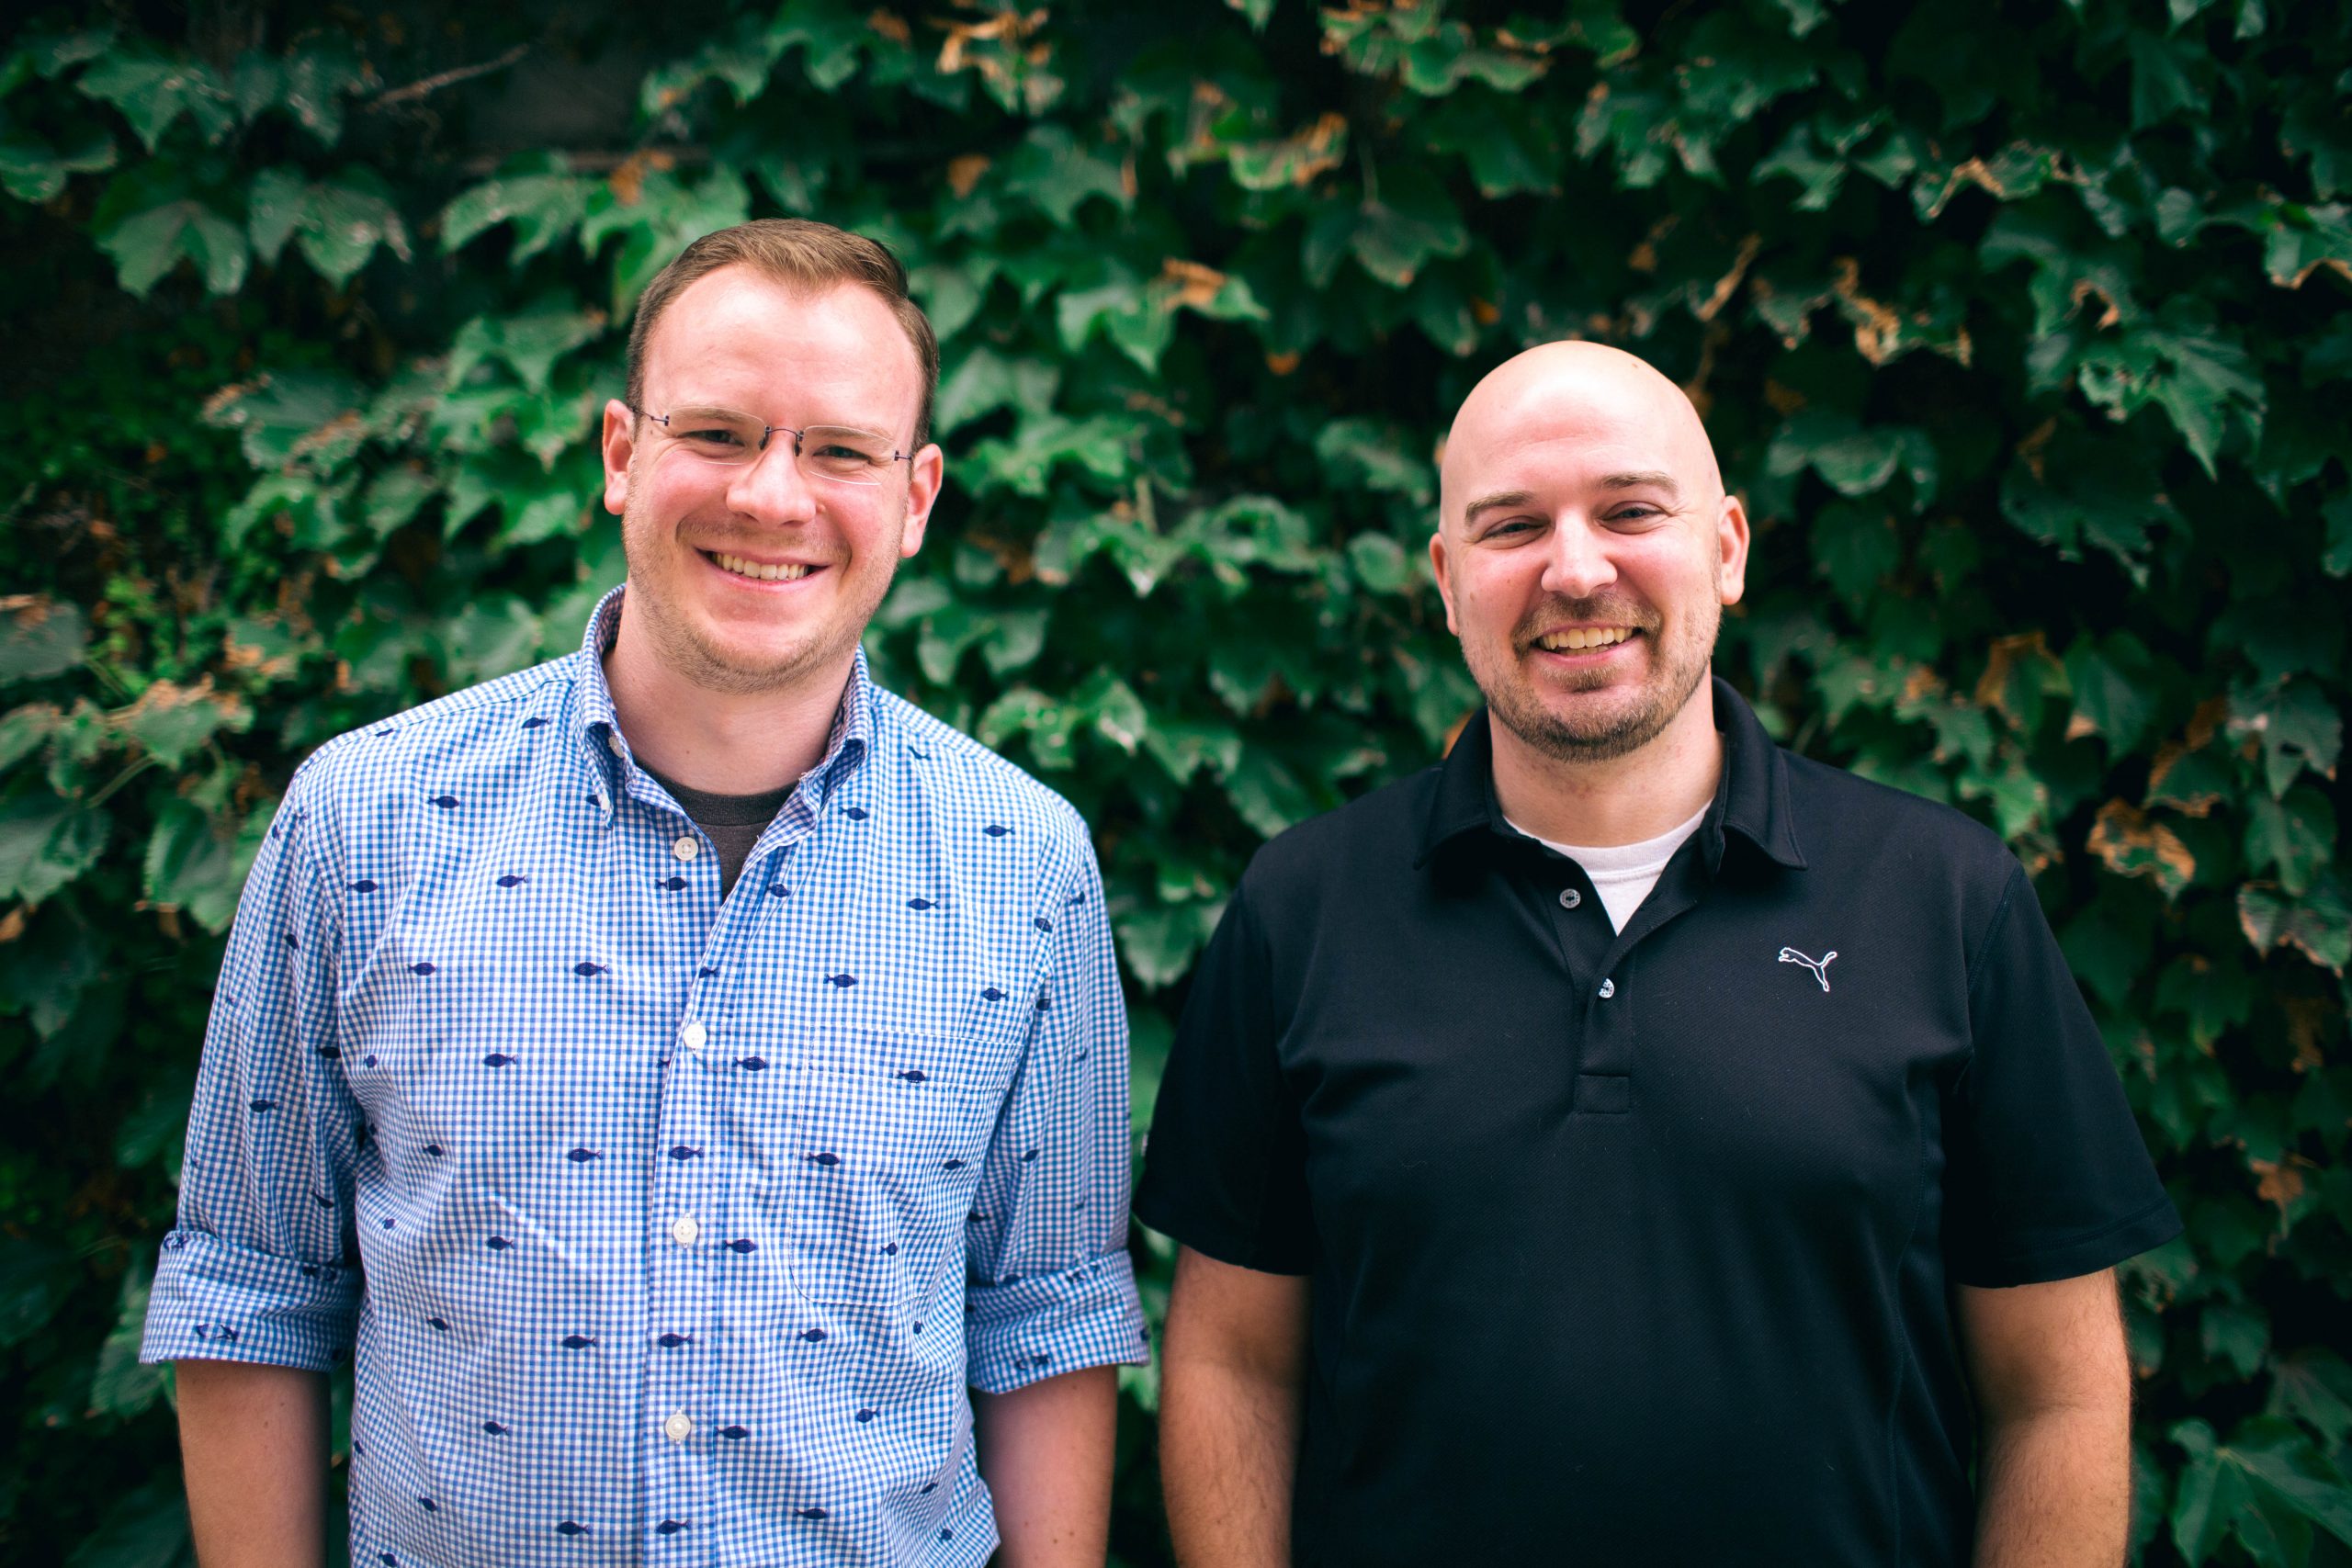 After selling Omaha startup Median, co-founders set aim on their next idea